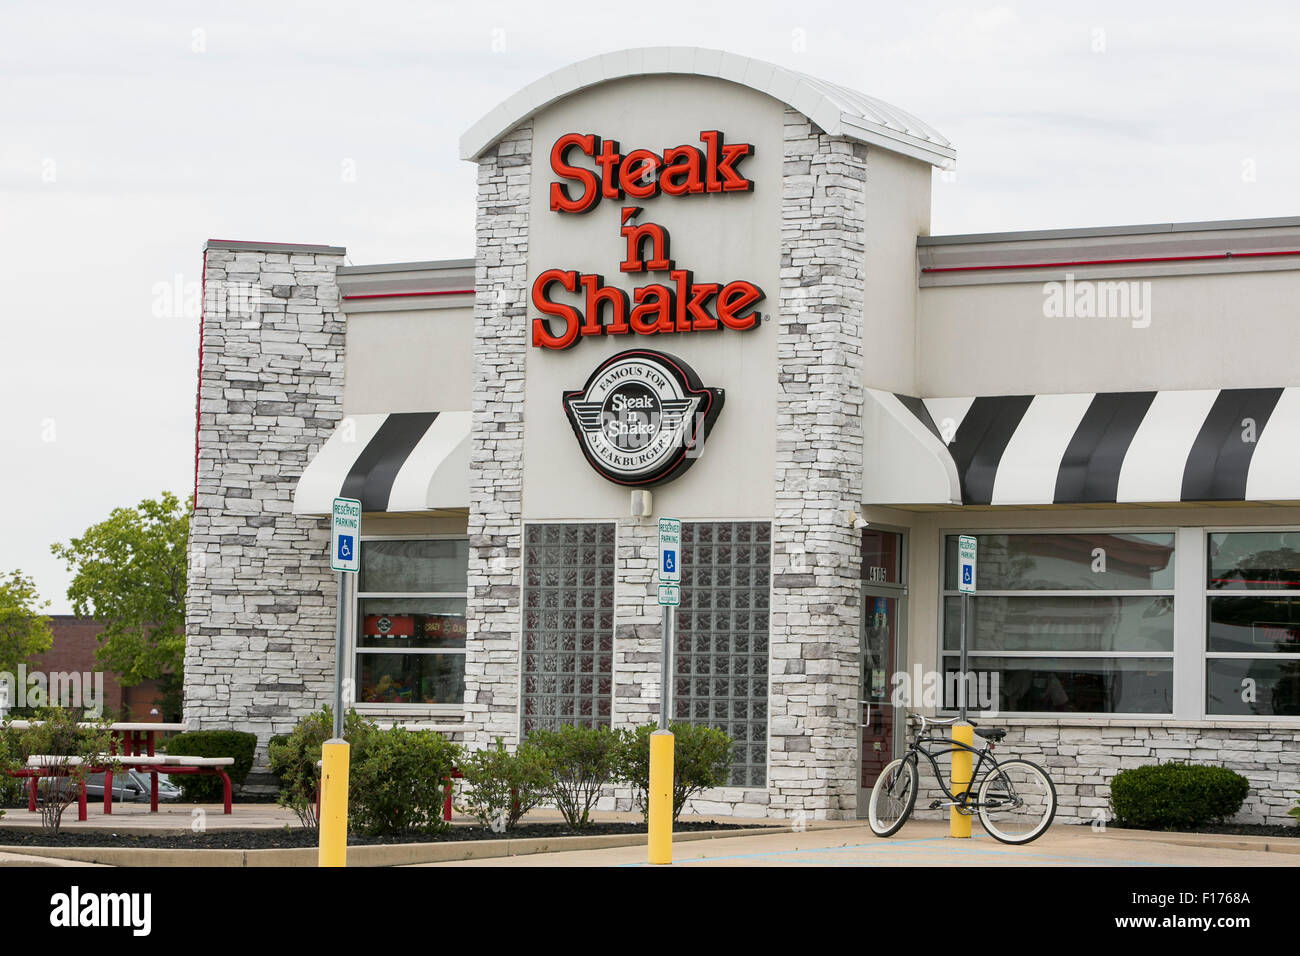 A logo sign outside of a Steak 'n Shake fast food restaurant in Indianapolis, Indiana on August 15, 2015. Stock Photo